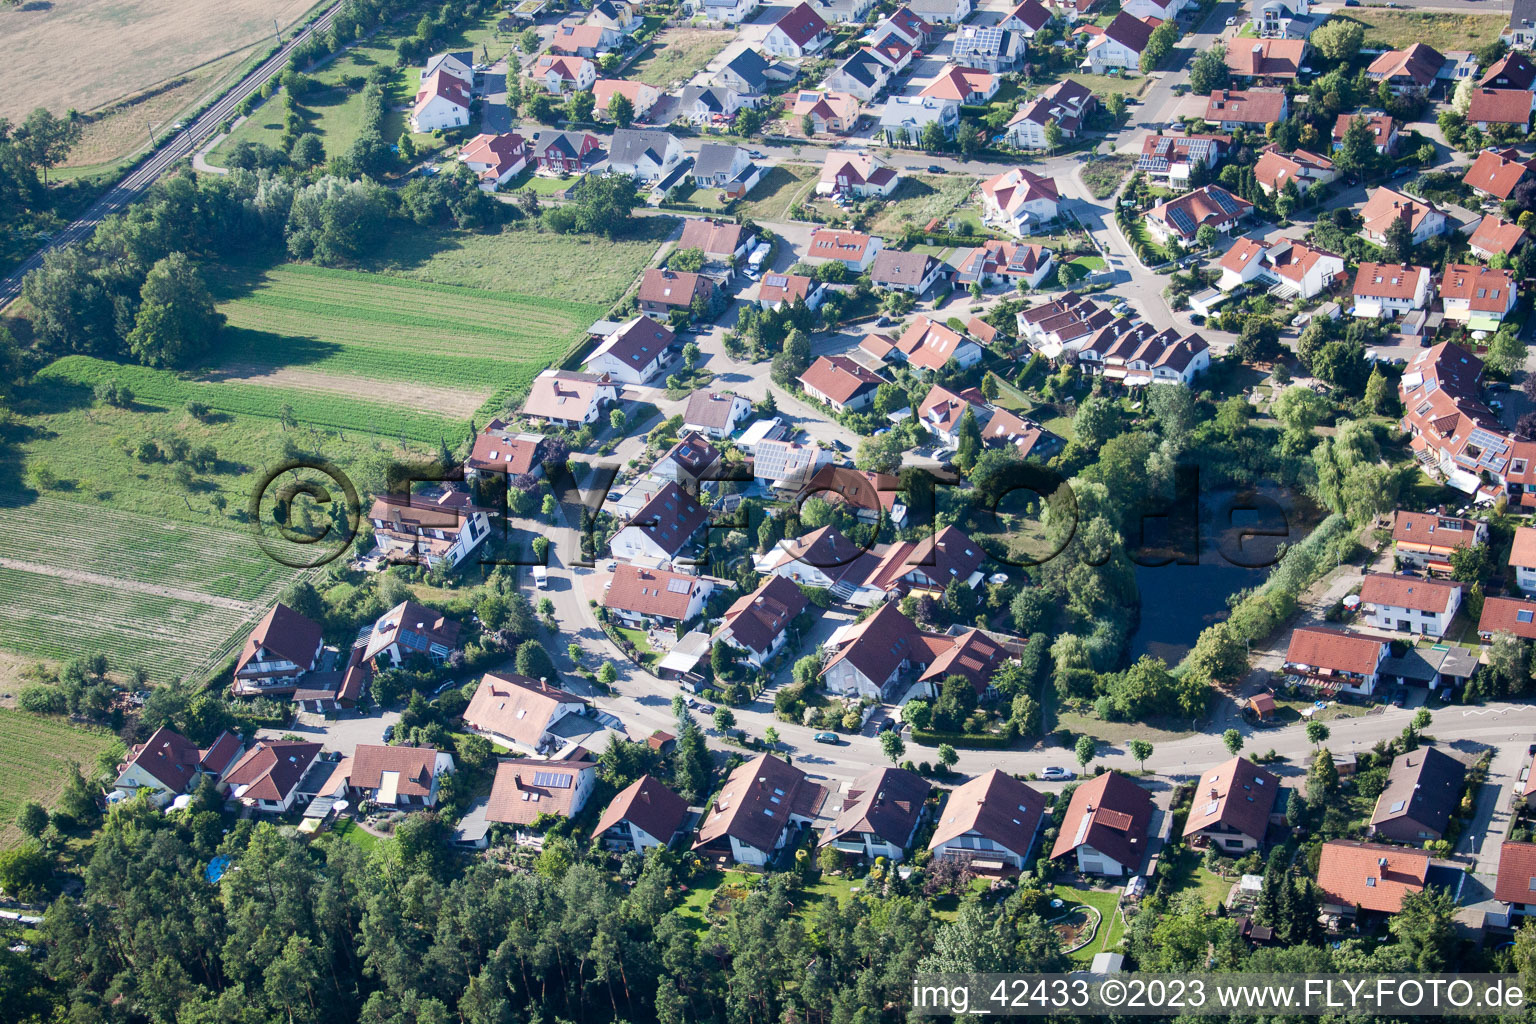 Aerial photograpy of New development area in Rheinzabern in the state Rhineland-Palatinate, Germany